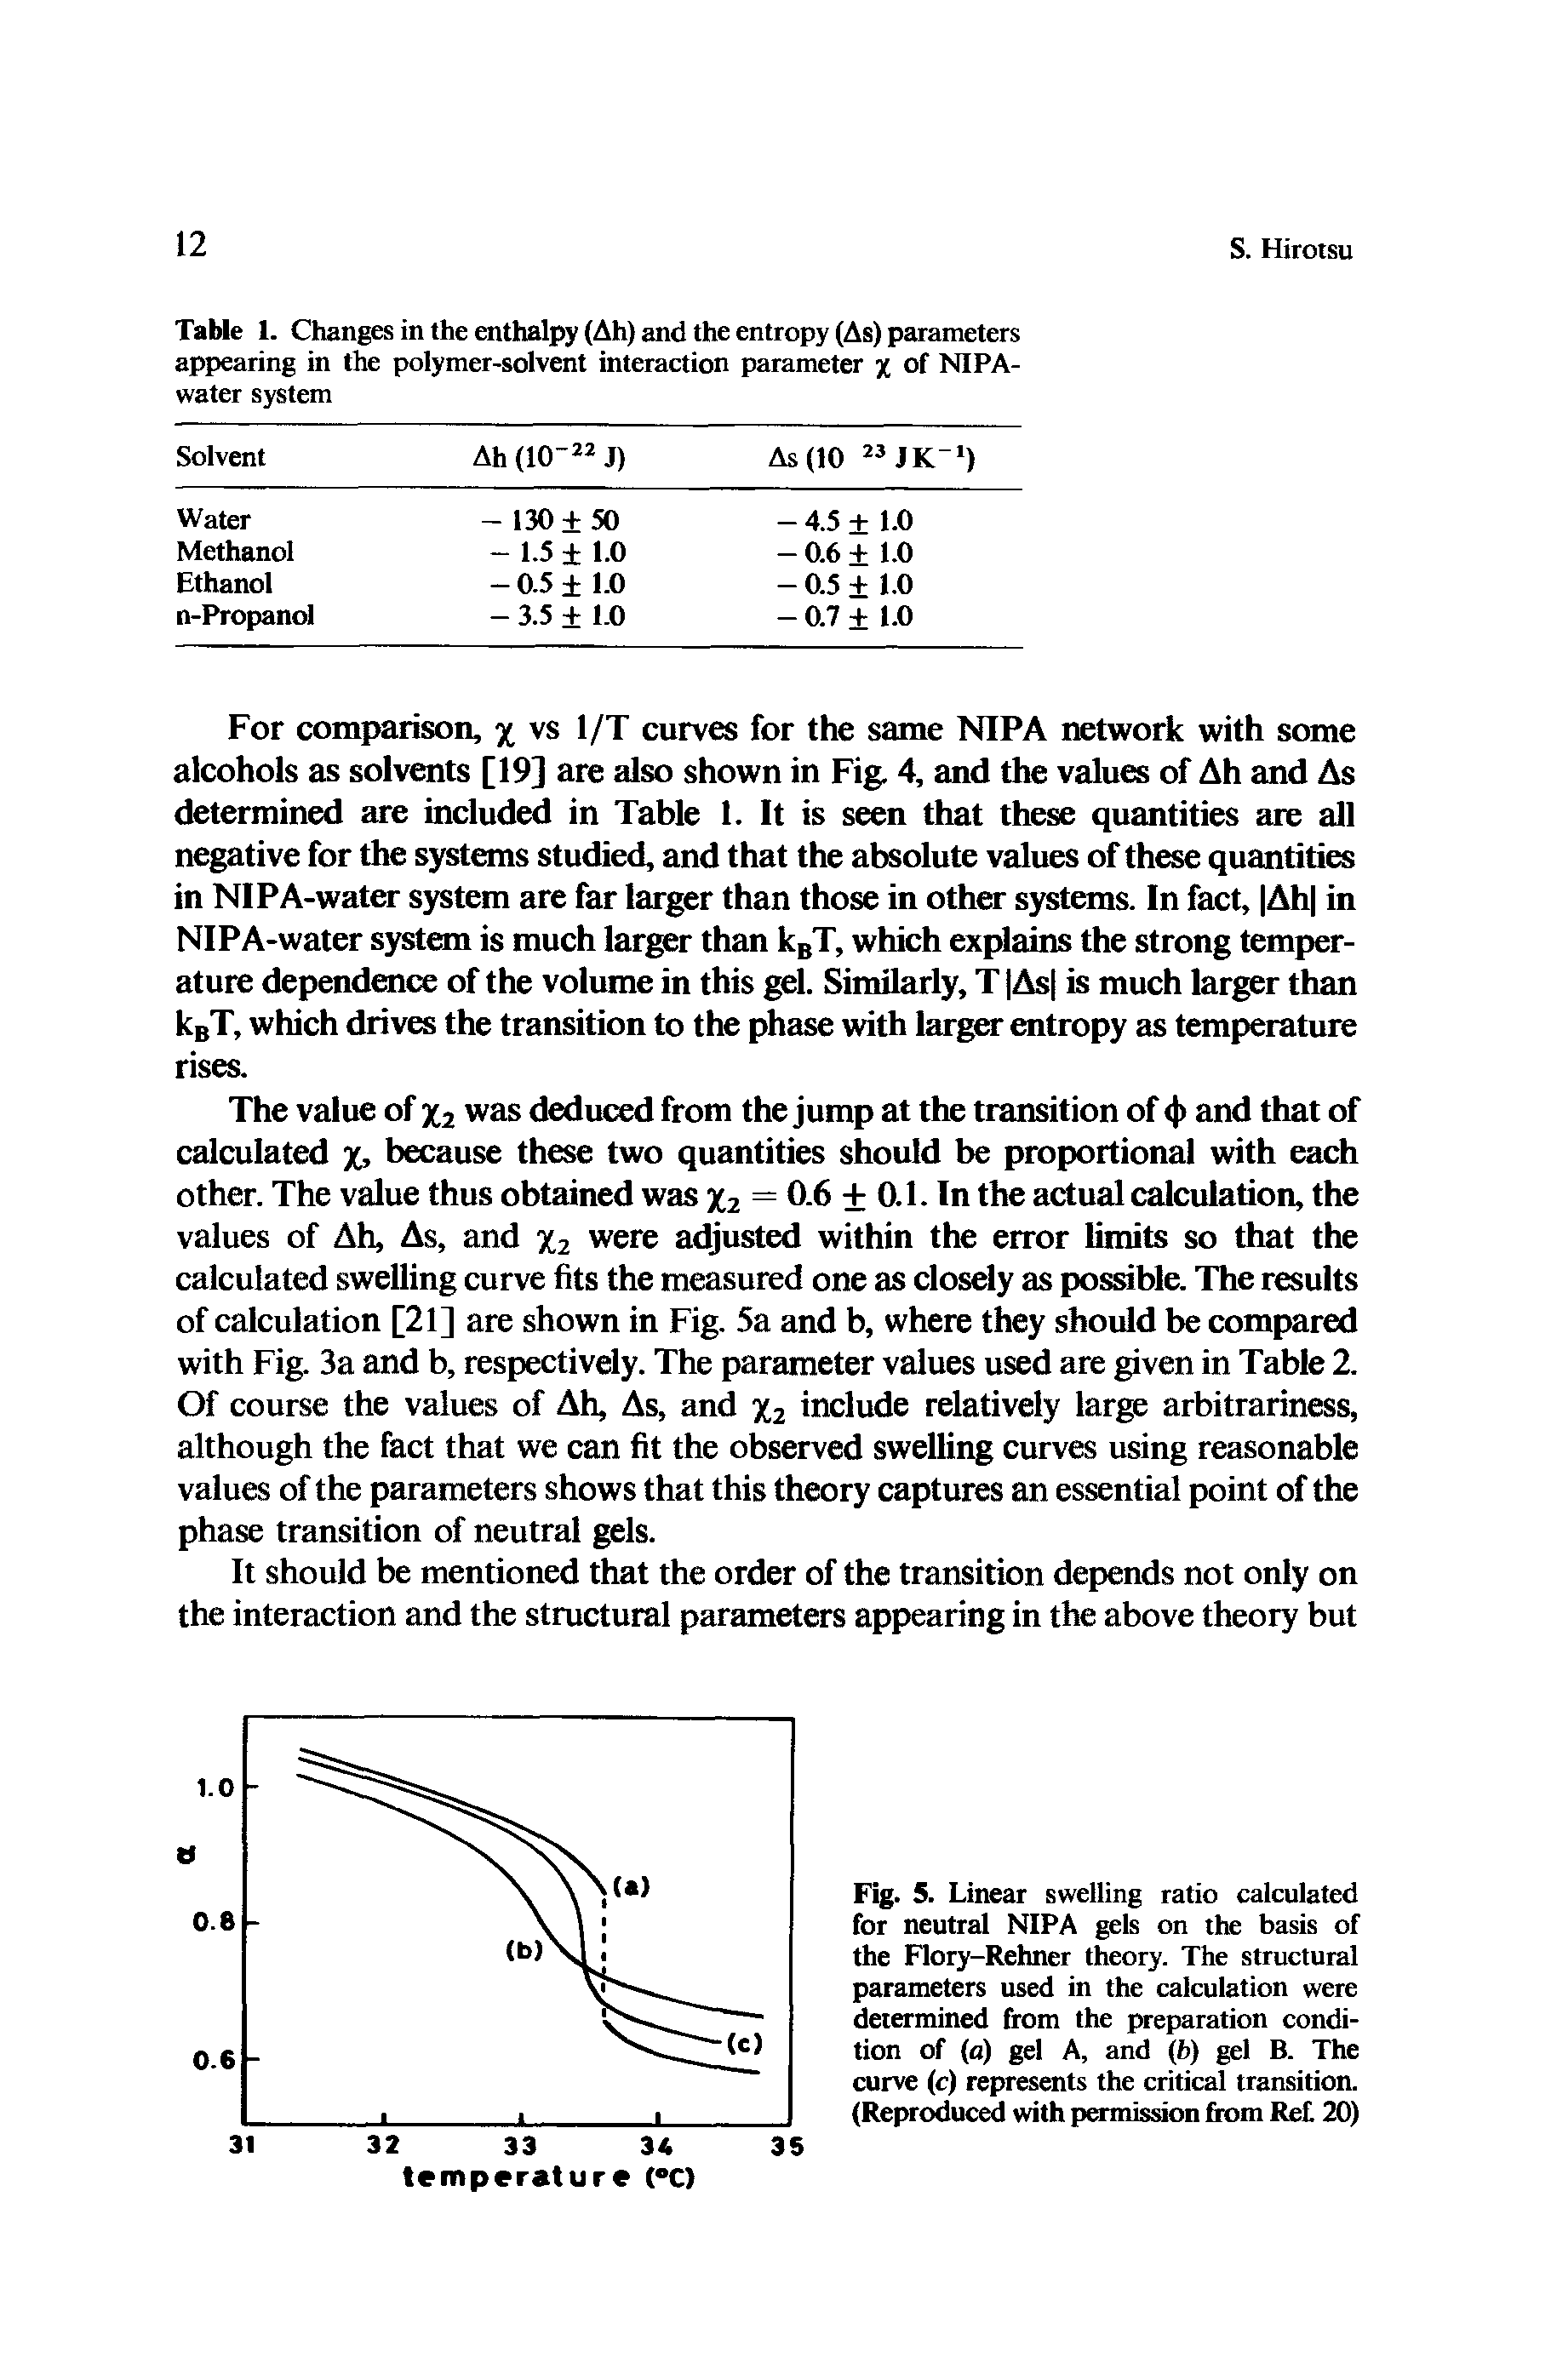 Fig. 5. Linear swelling ratio calculated for neutral NIPA gels on the basis of the Flory-Rehner theory. The structural parameters used in the calculation were determined from the preparation condition of (a) gel A, and ( >) gel B. The curve (c) represents the critical transition. (Reproduced with permission from Ref 20)...